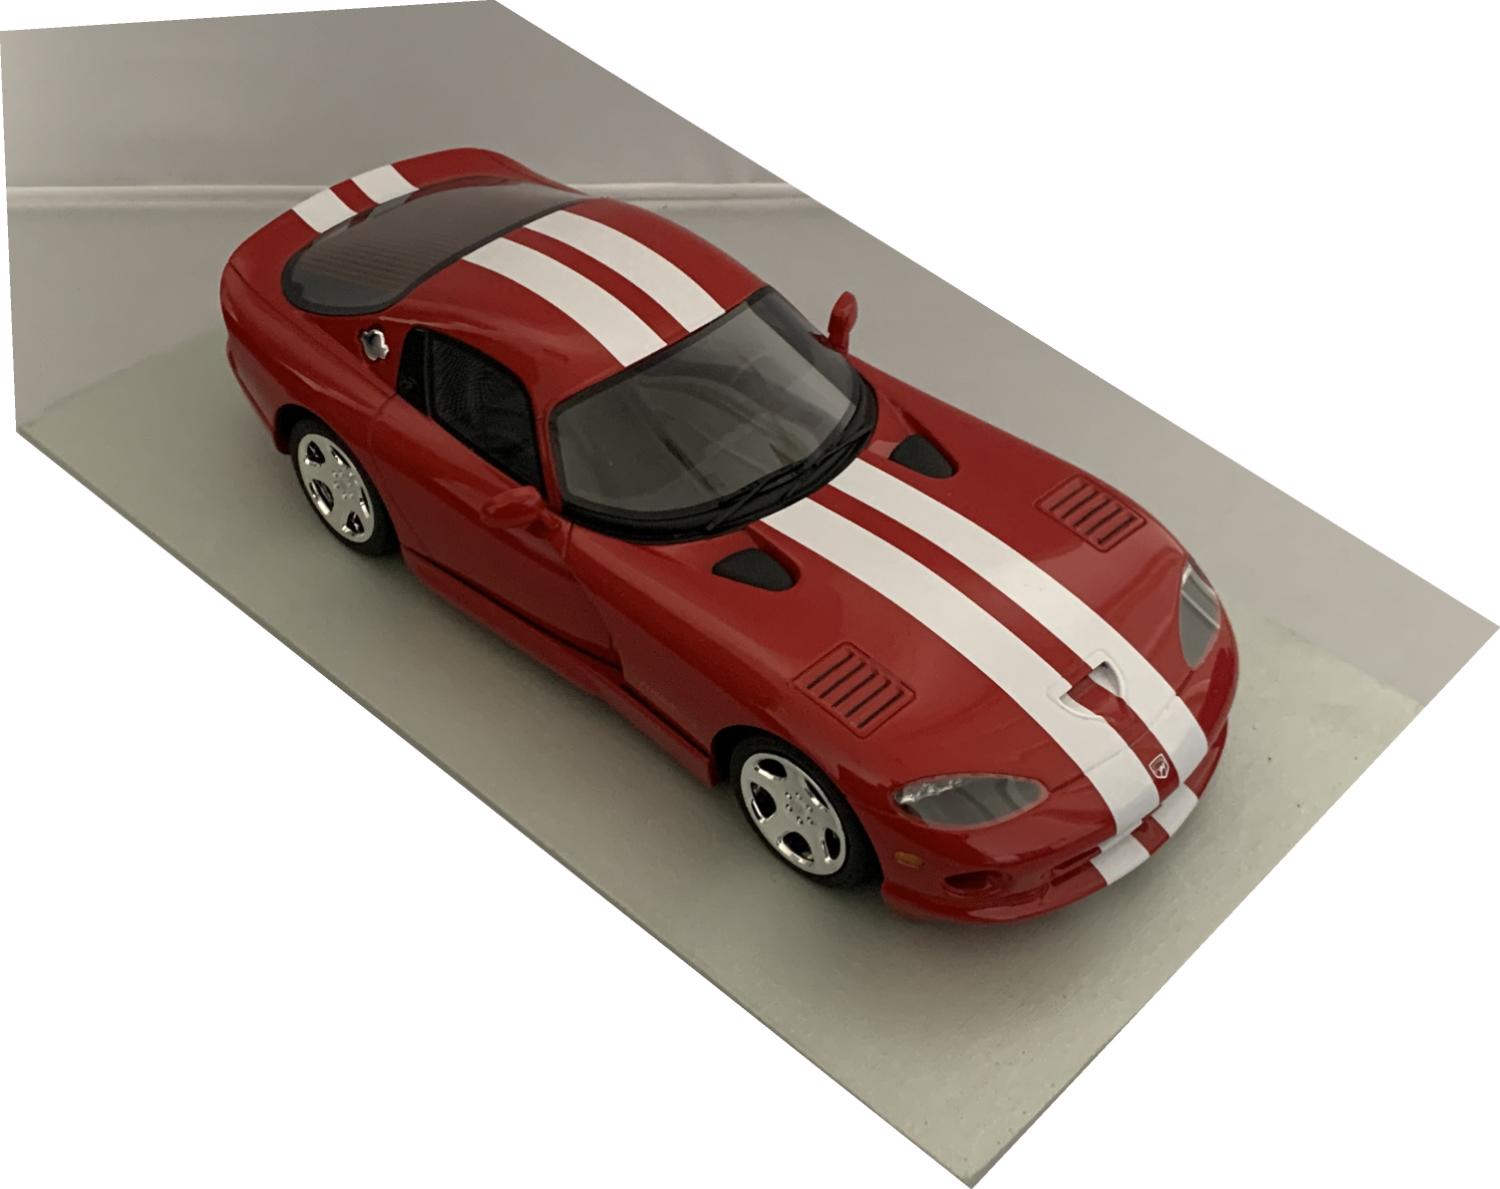 A very good representation of the Dodge Viper GTS from 2002 decorated in red with white stripes, bonnet and side air vents, twin exhausts and chrome wheels.